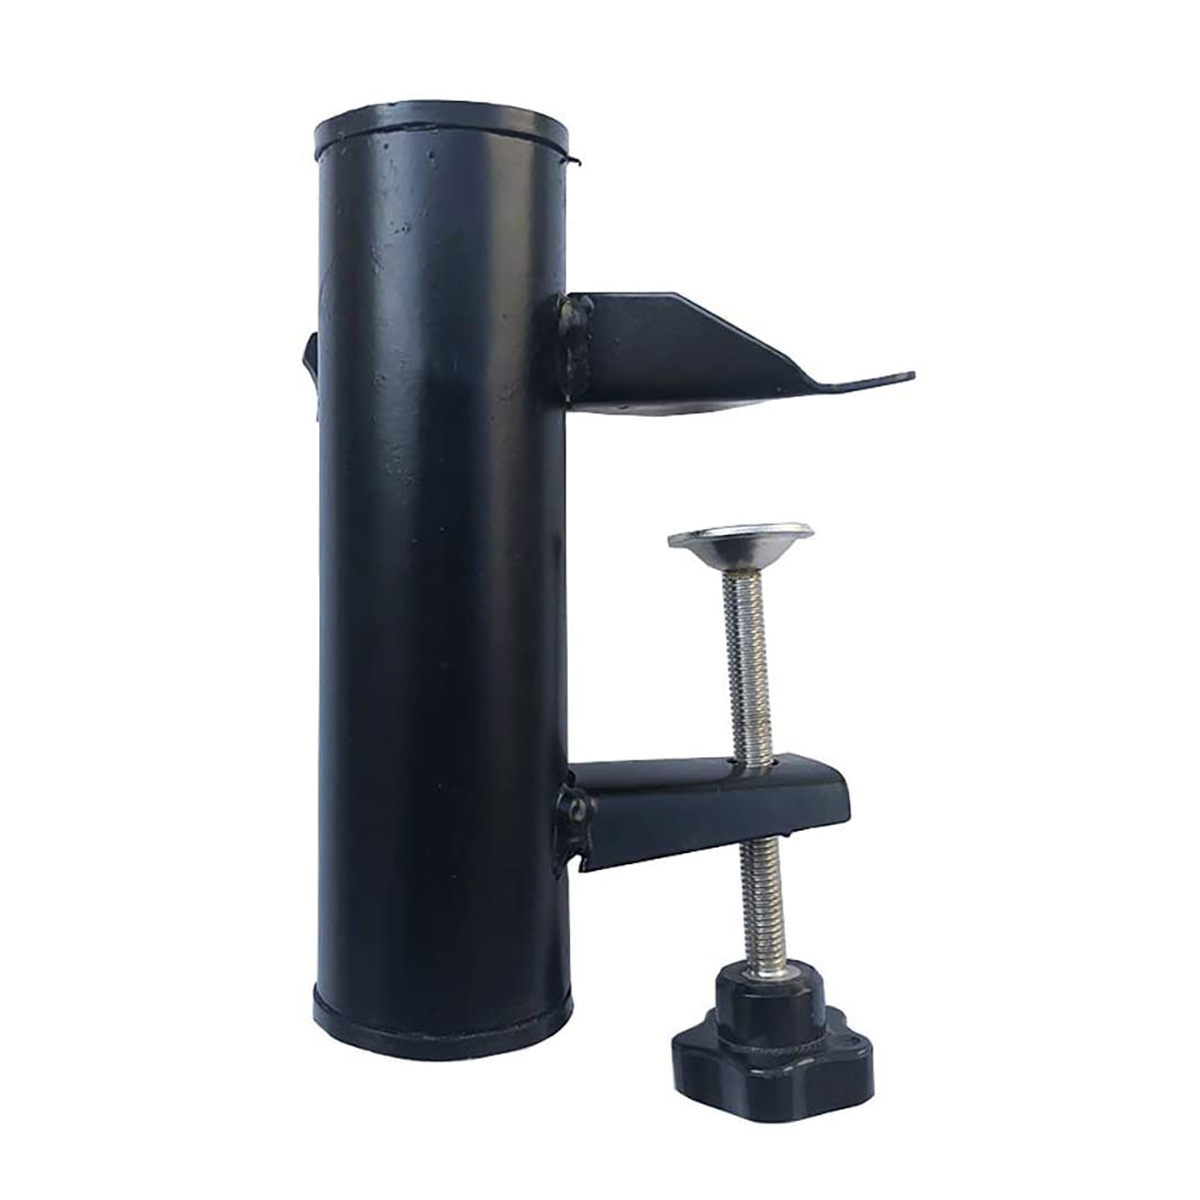 Patio Umbrella Stands Fixed Clip Black Portable Parasol Holder Table Mount Clamp for Outdoor Use Shade Accessories Garden Supply